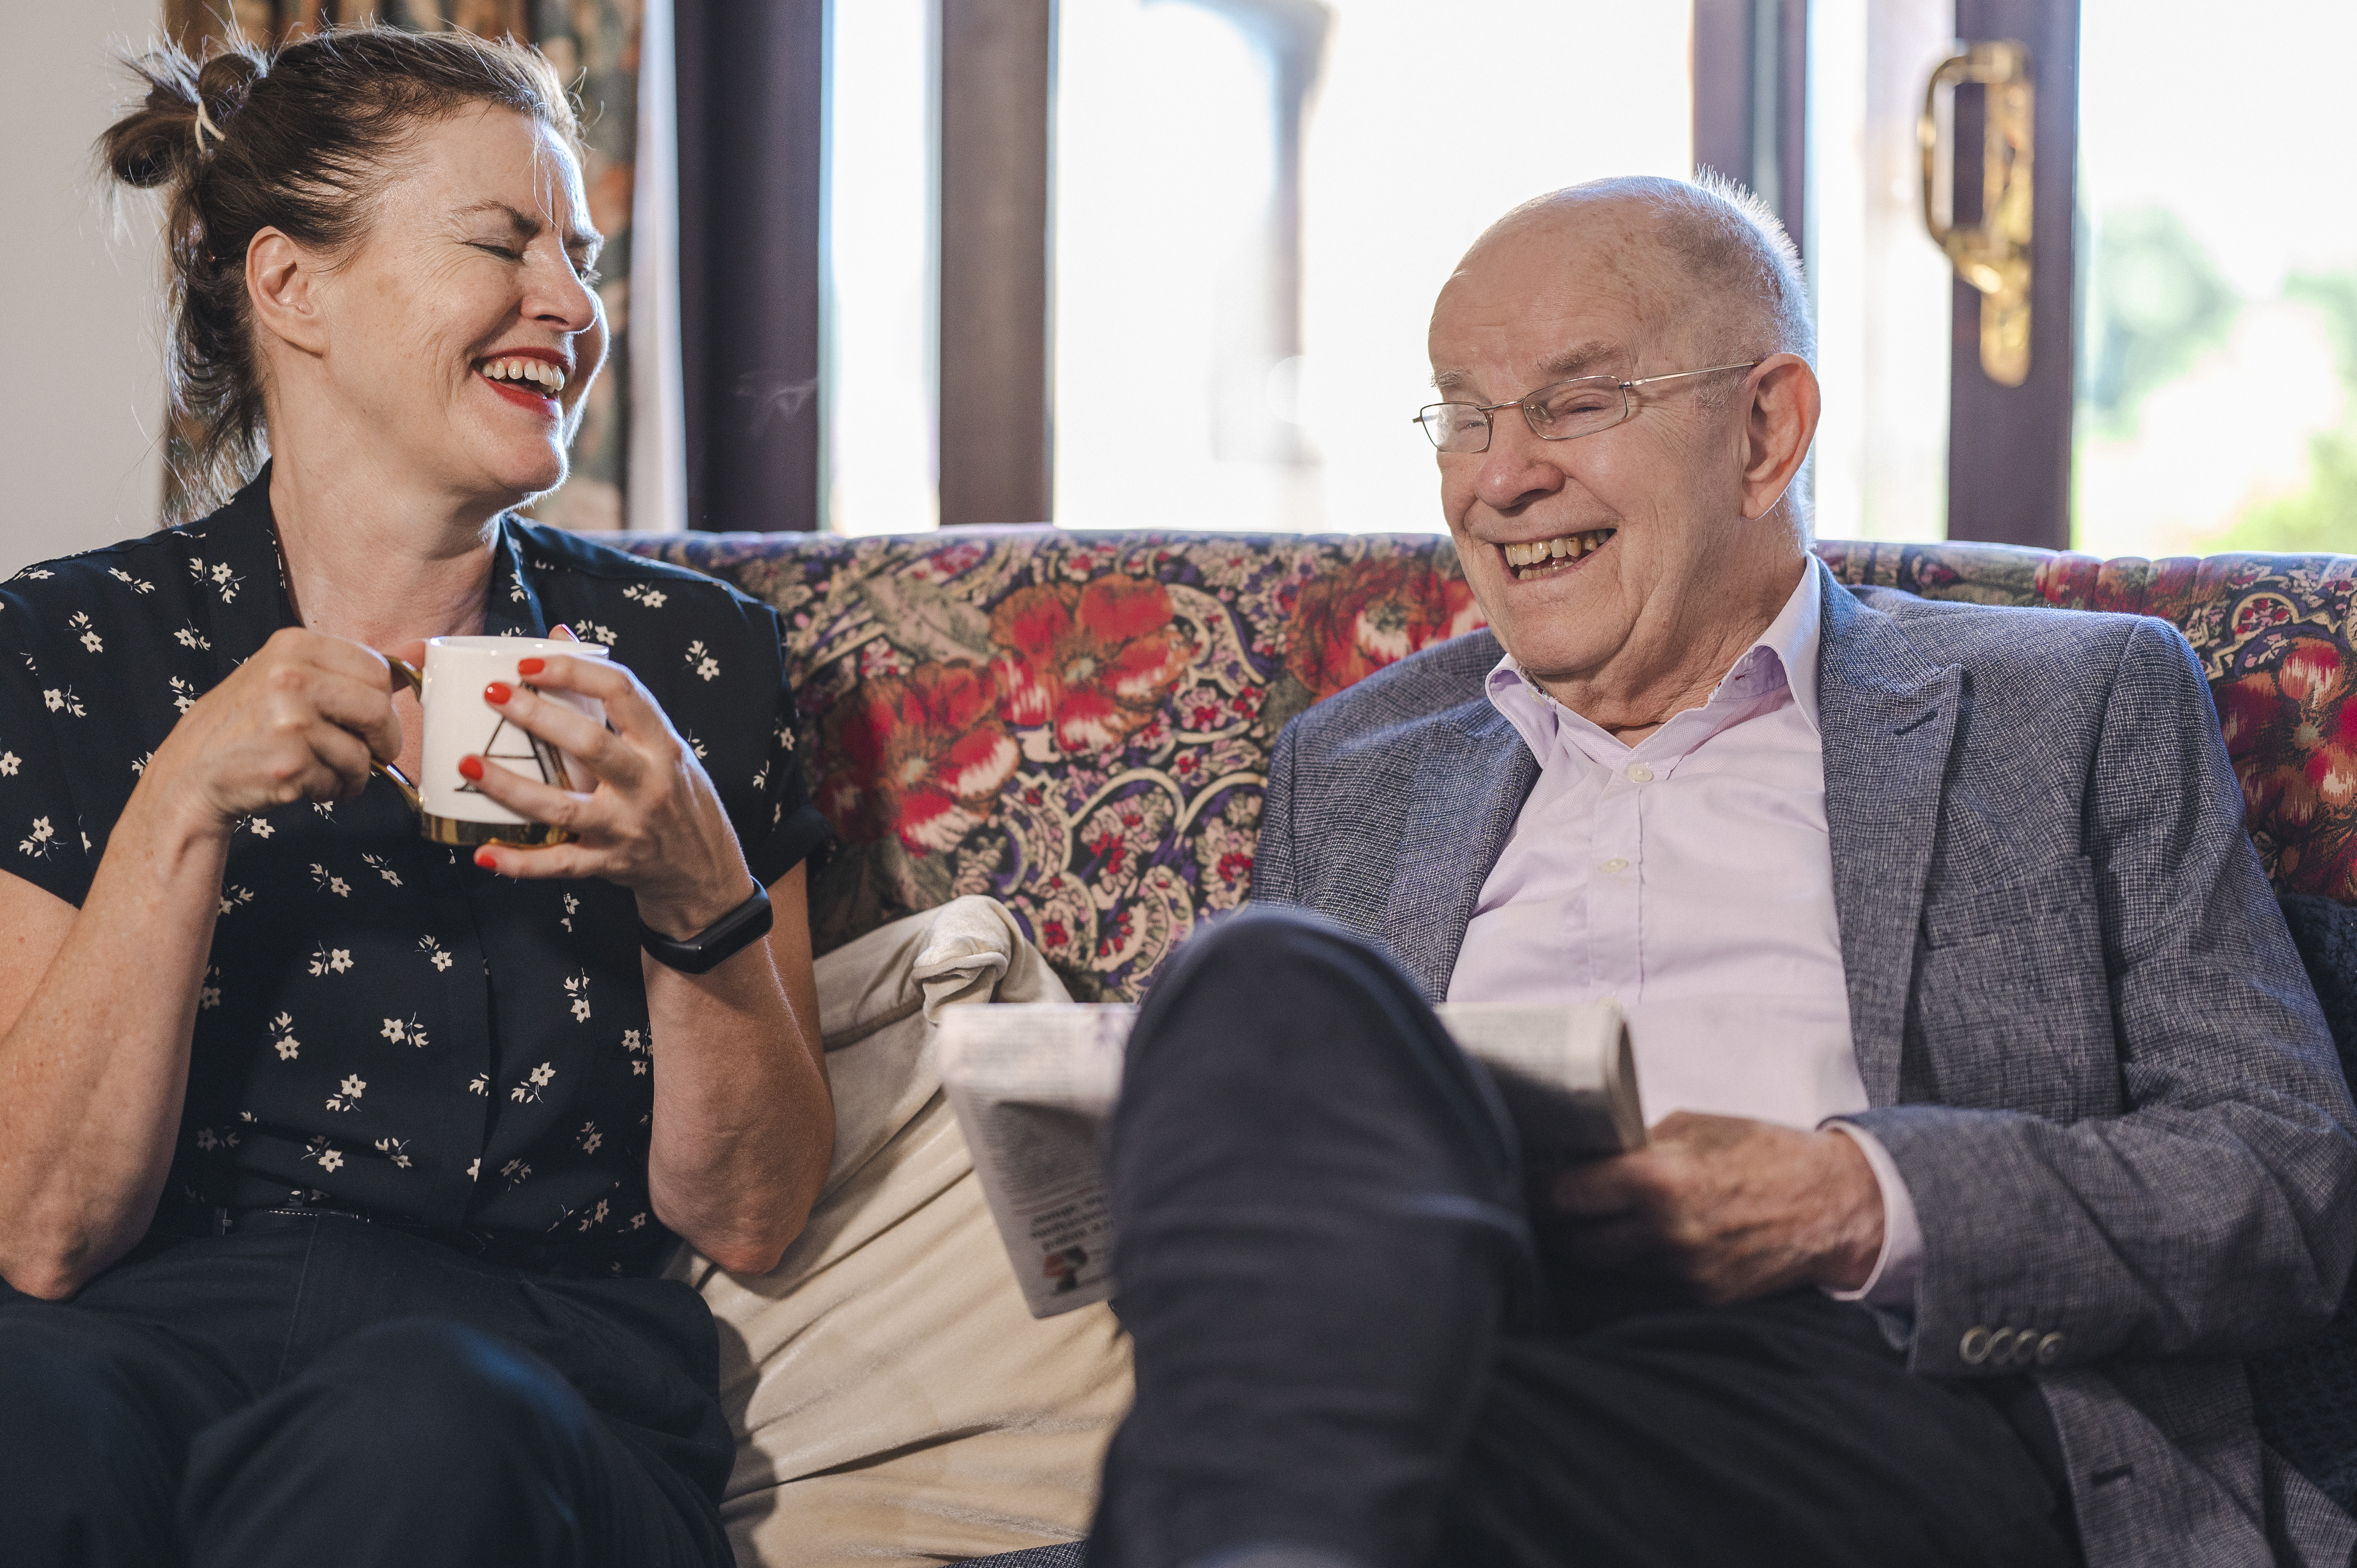 Effective friendships offer multiple benefits to both mental and physical health. With the fragmentation of society and disappearance of older forms of community, meeting new people can be difficult. Check how BuddyHub can help.